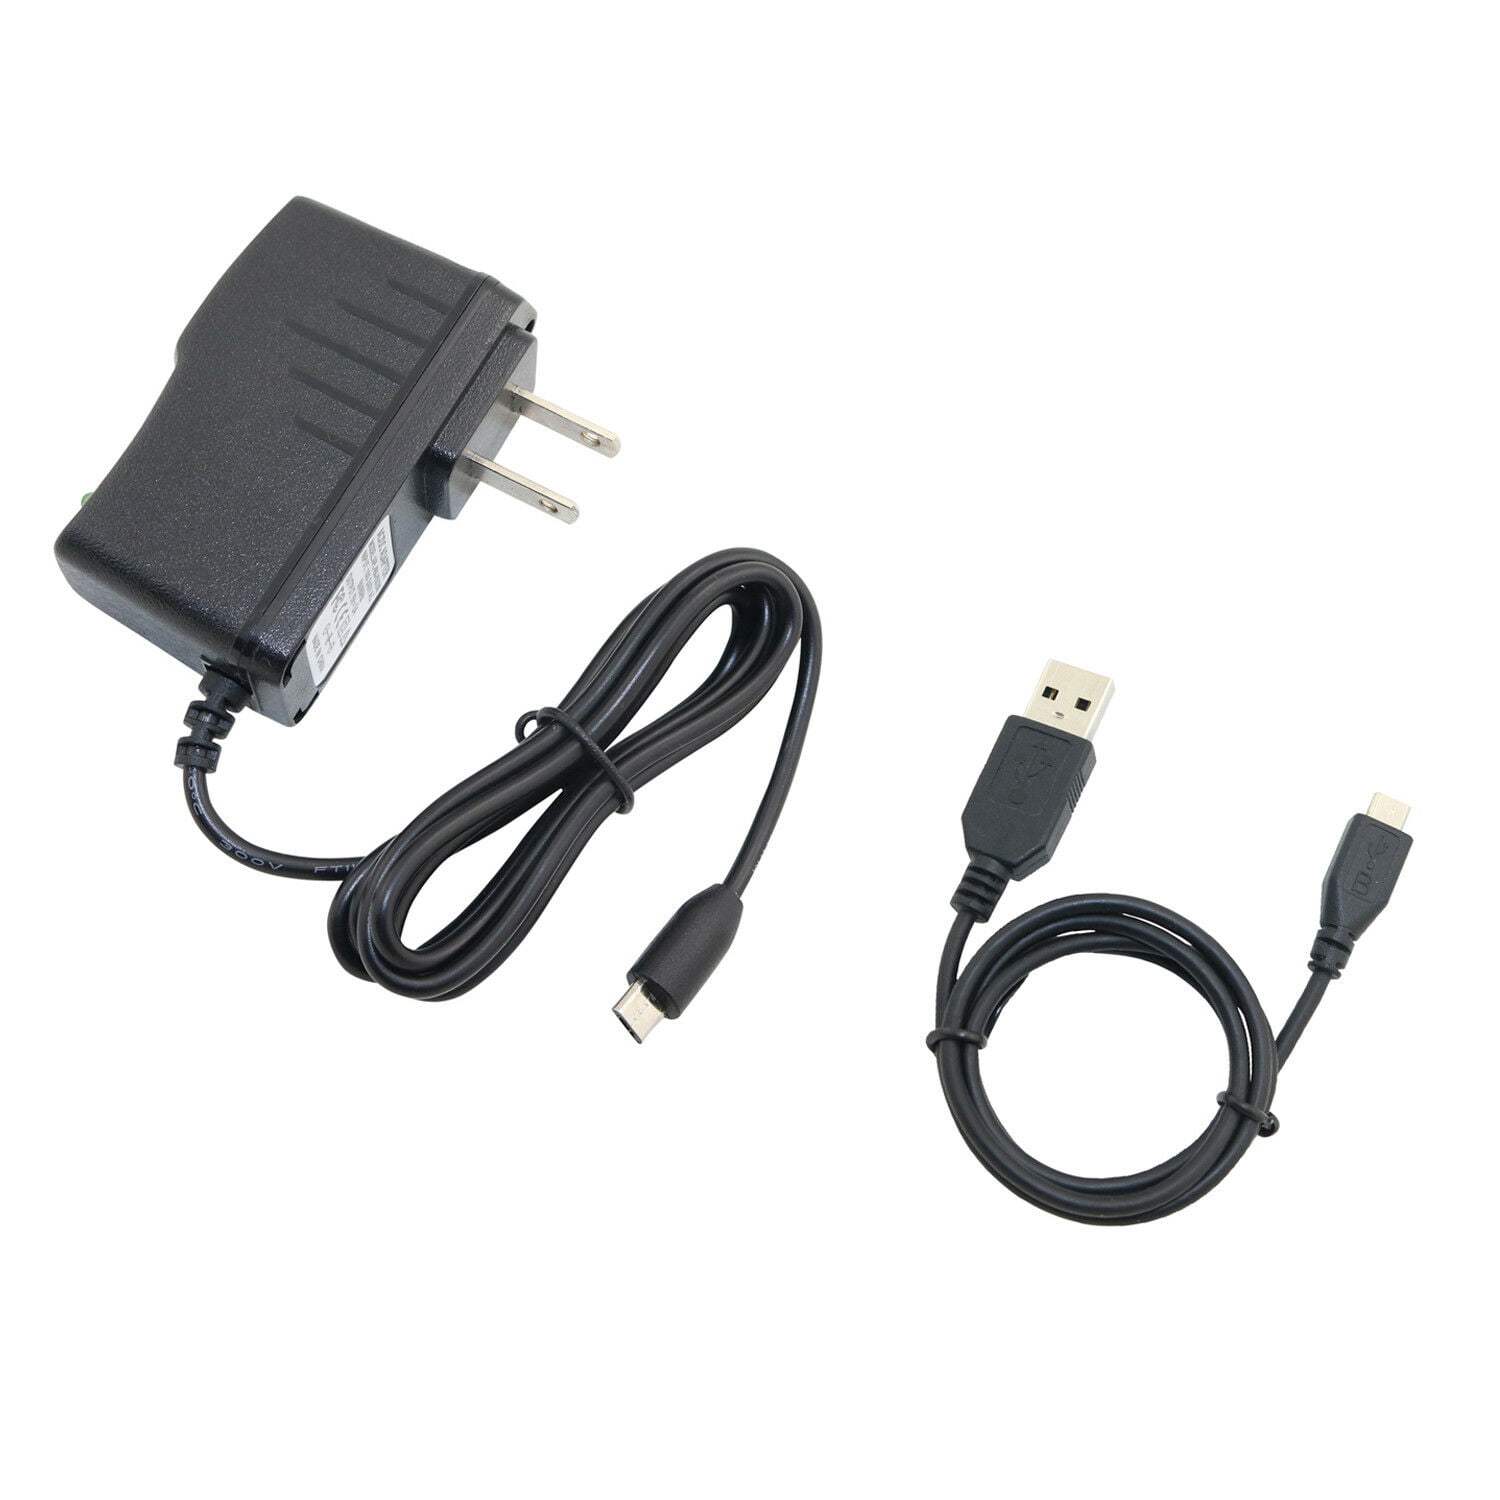 AC/DC Power Adapter DC Wall Charger USB Cord for LG G Pad 10.1 V700 AUS Tablet 